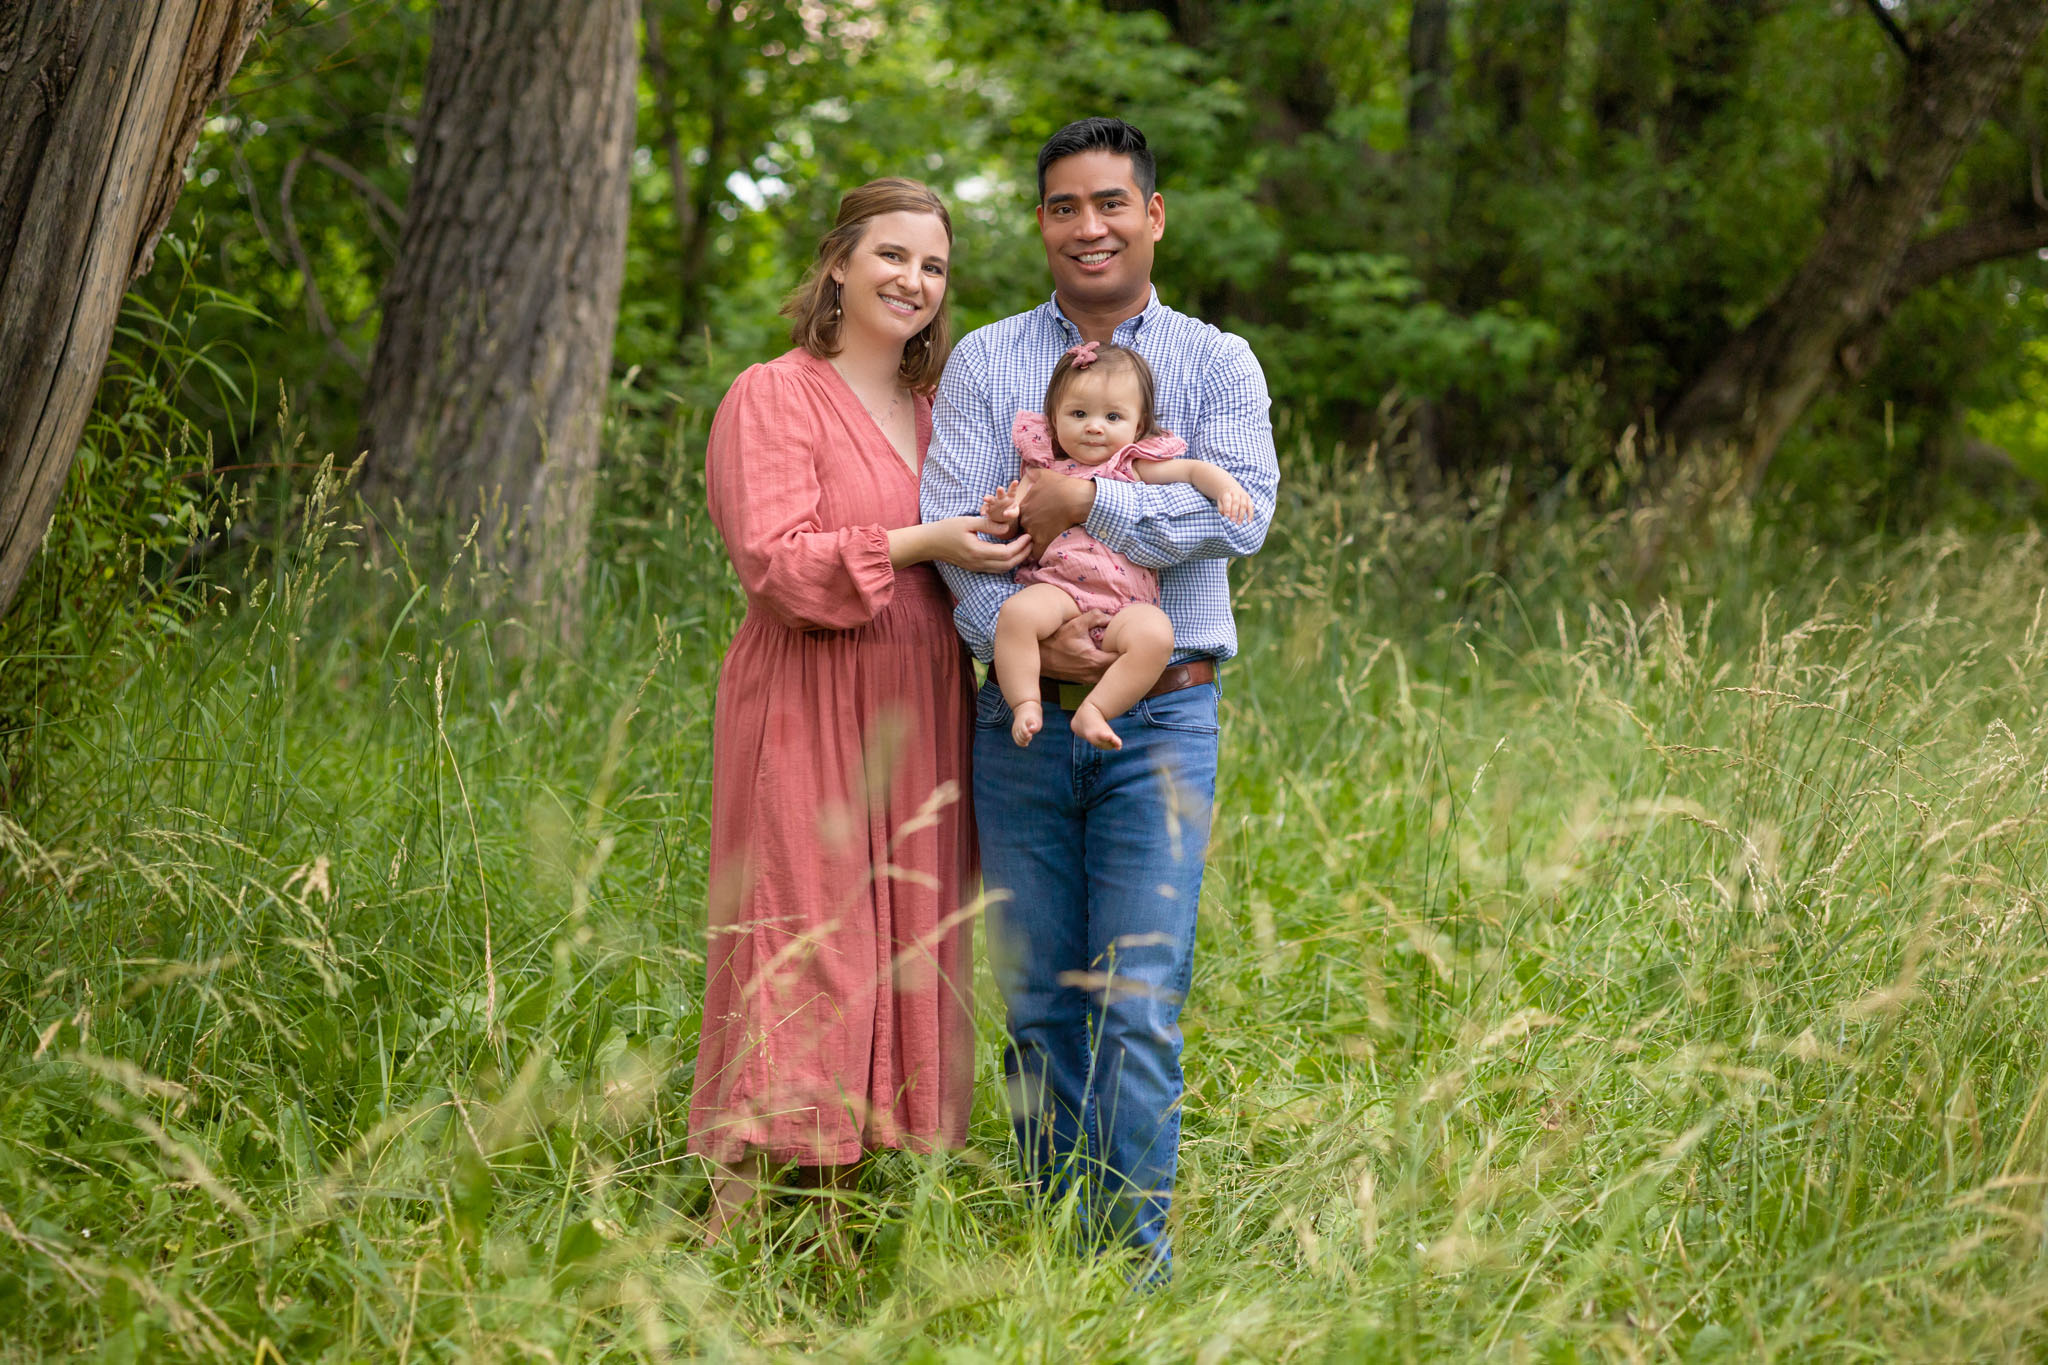 mom and dad holding young baby daughter standing together in a grassy field under trees in Pueblo CO